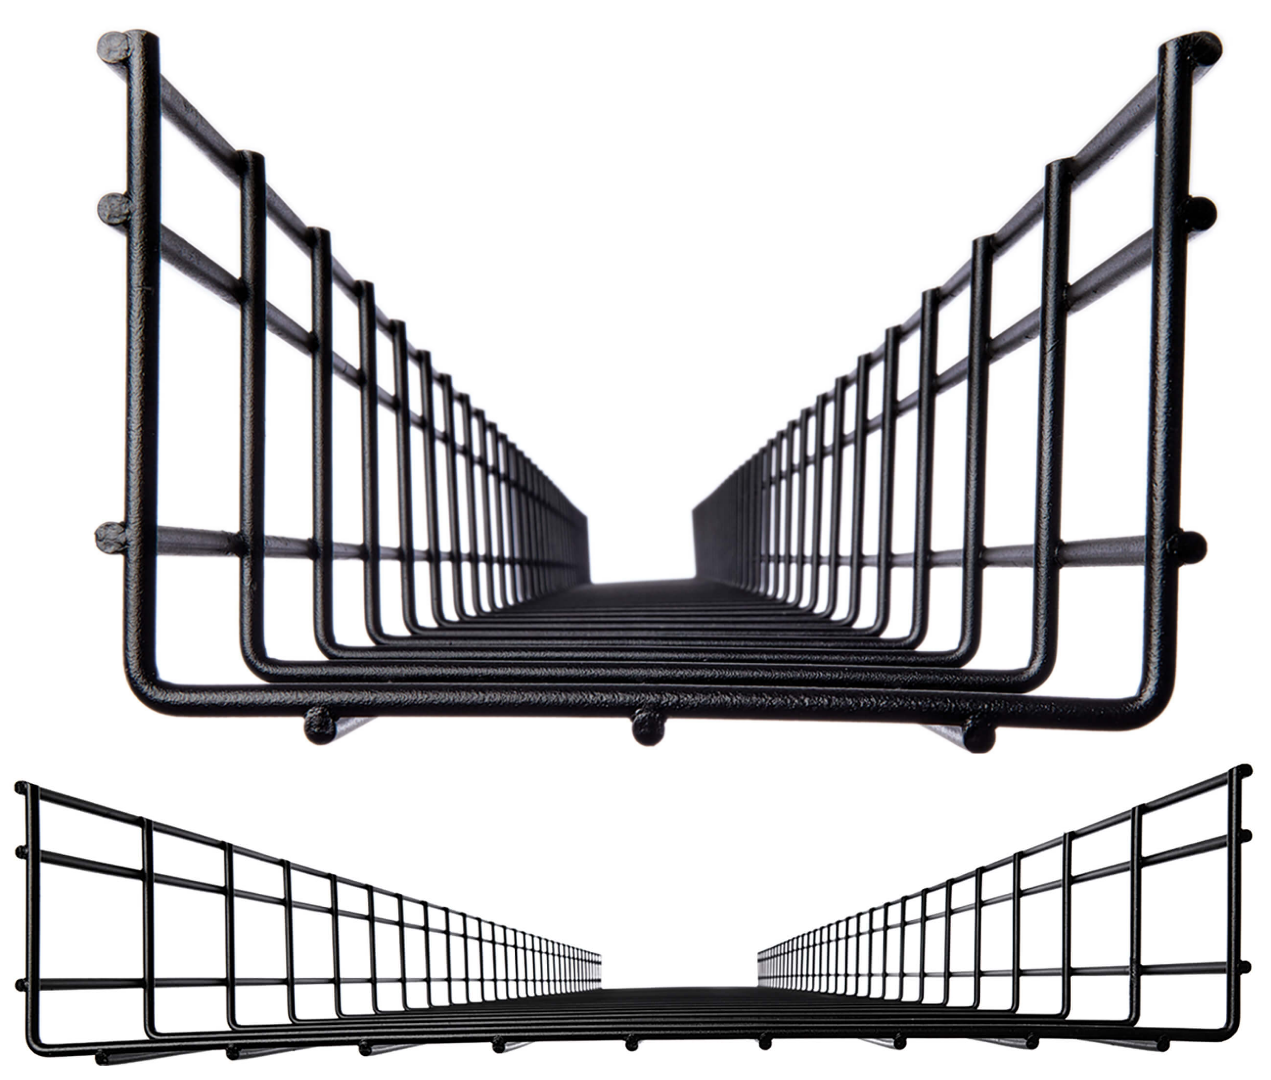 Cable Tray Distributor in Jamshedpur - Loofal